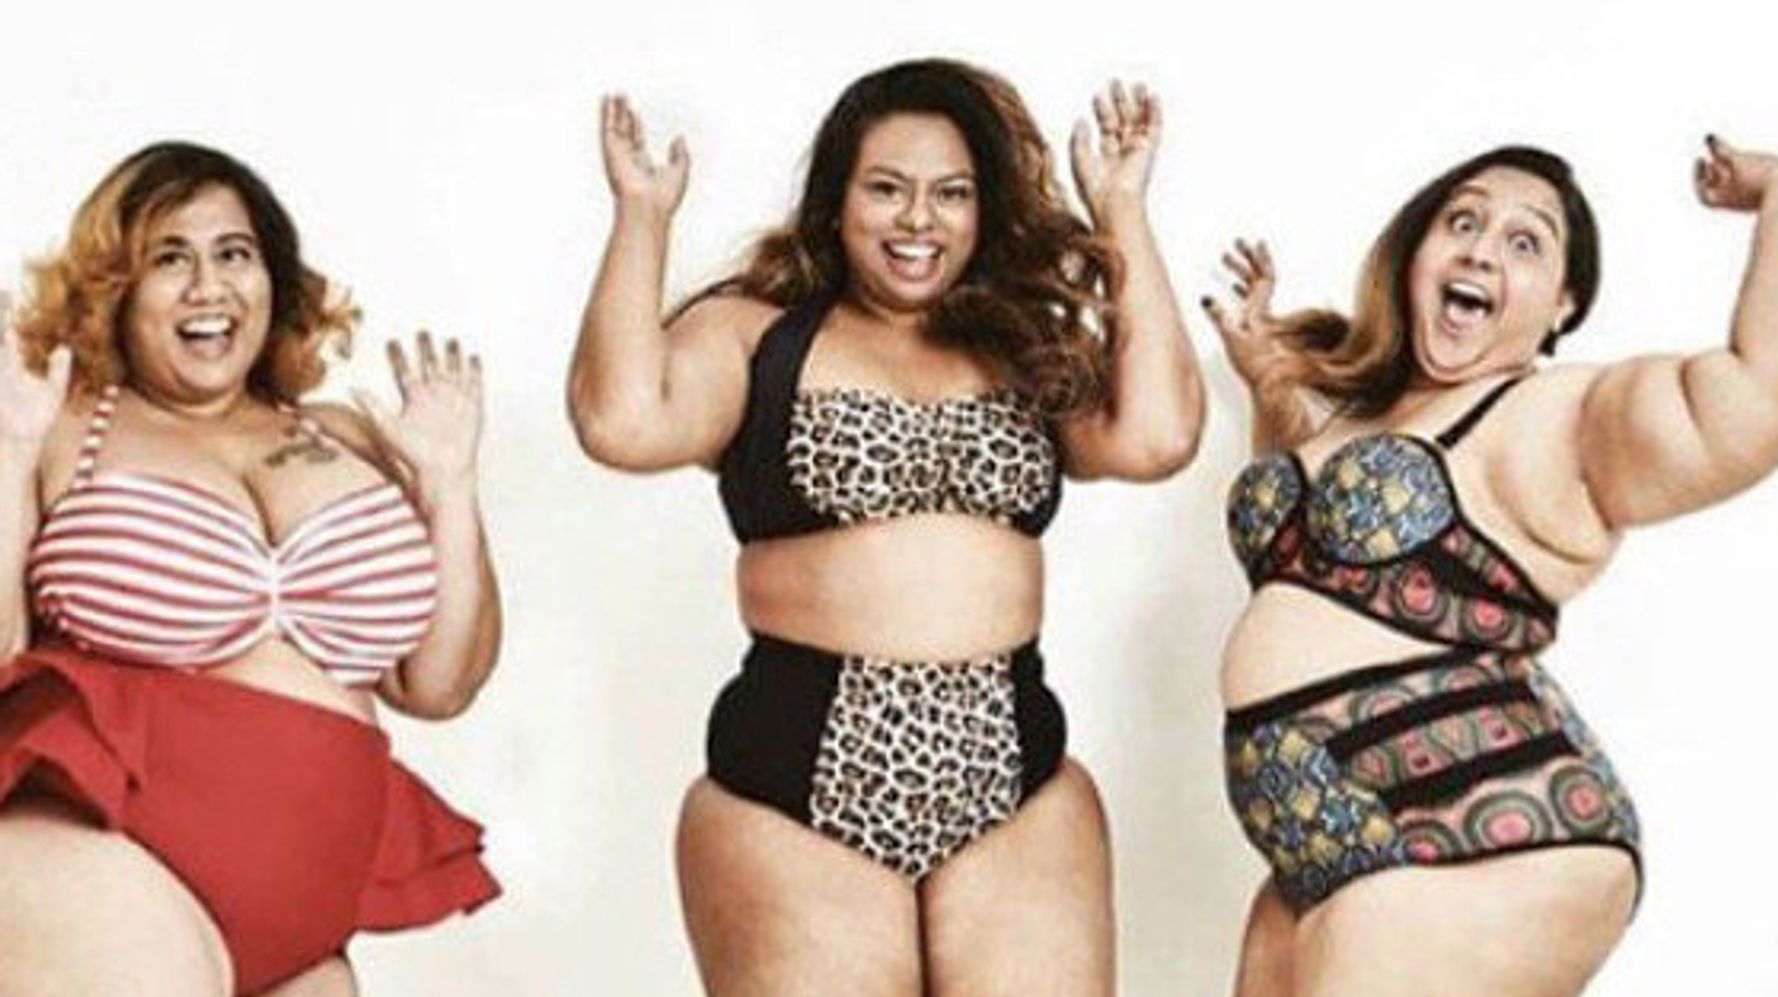 Brazil Nude Beach Tumblr - Did We Violate Instagram Guidelines By Being 'Too Fat' To Wear A Swimsuit?  | HuffPost News